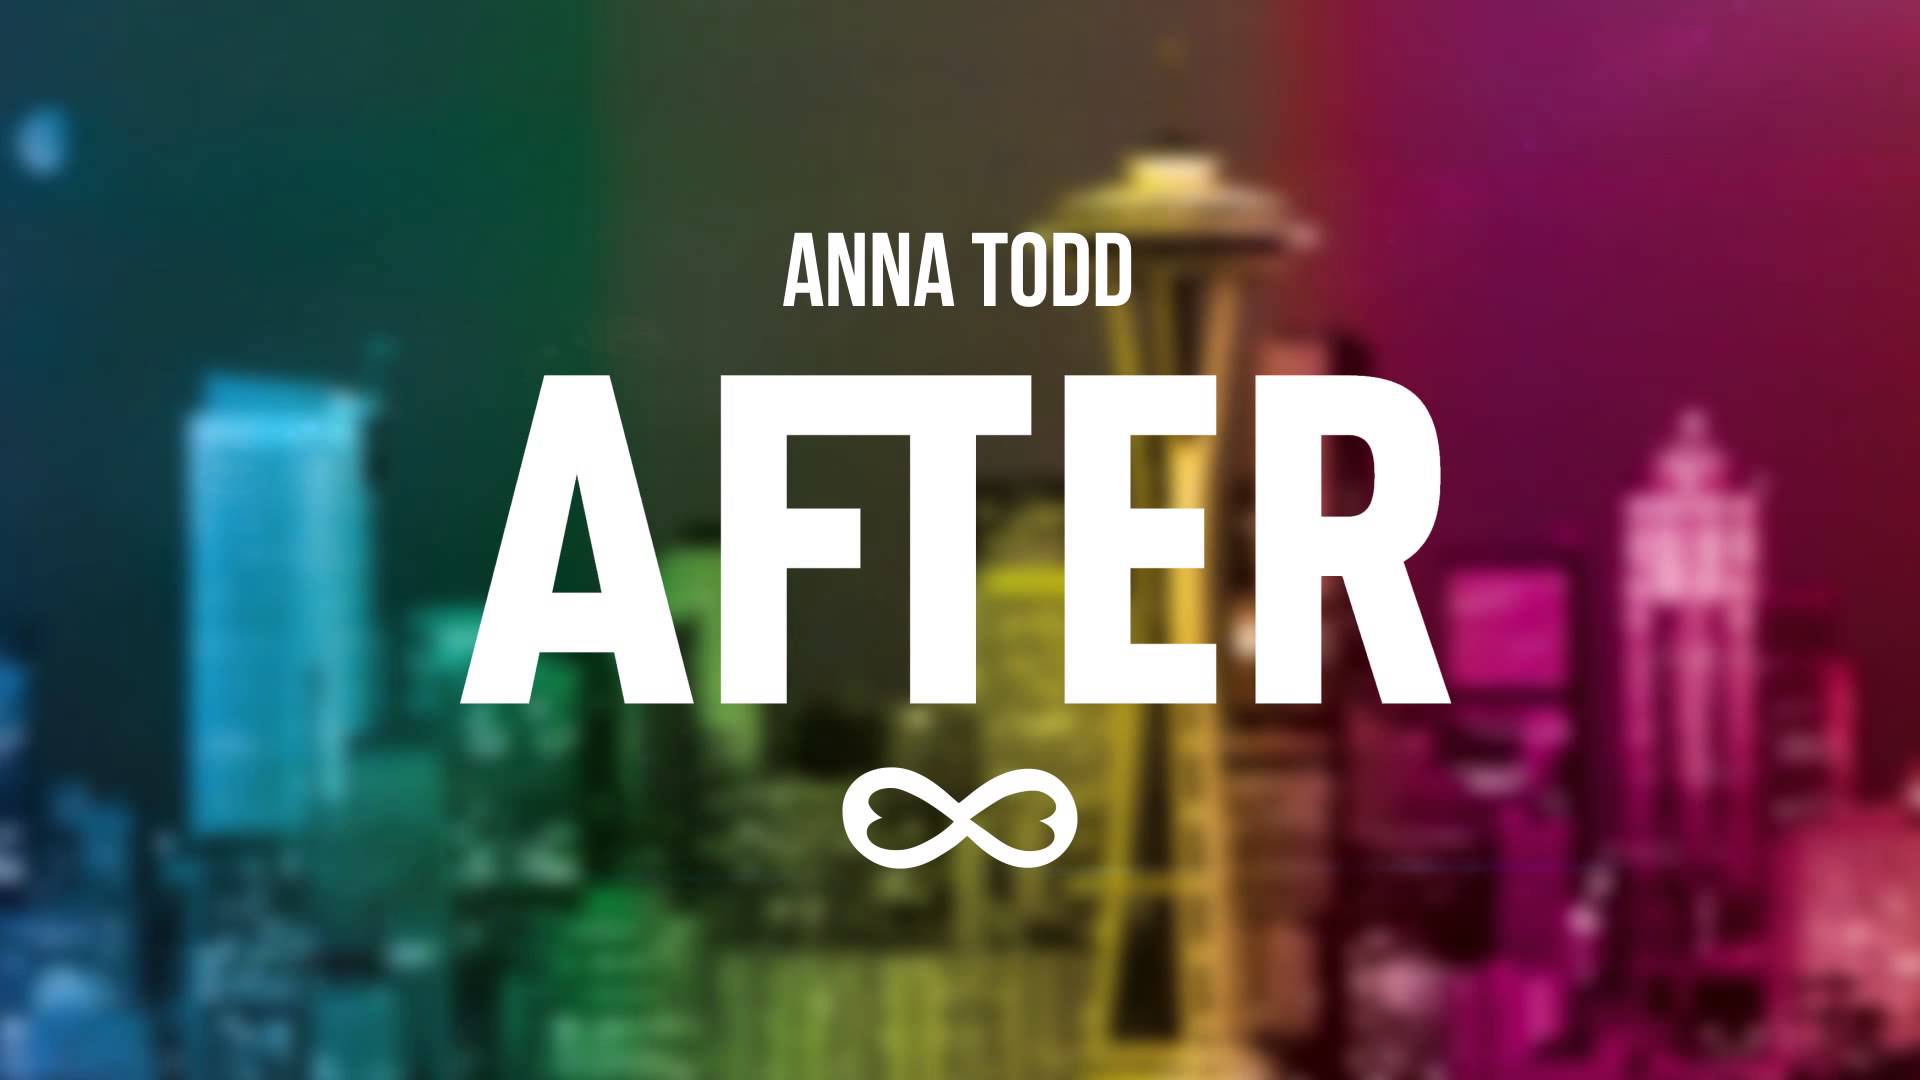 AFTER | Anna Todd | official video Italia - YouTube